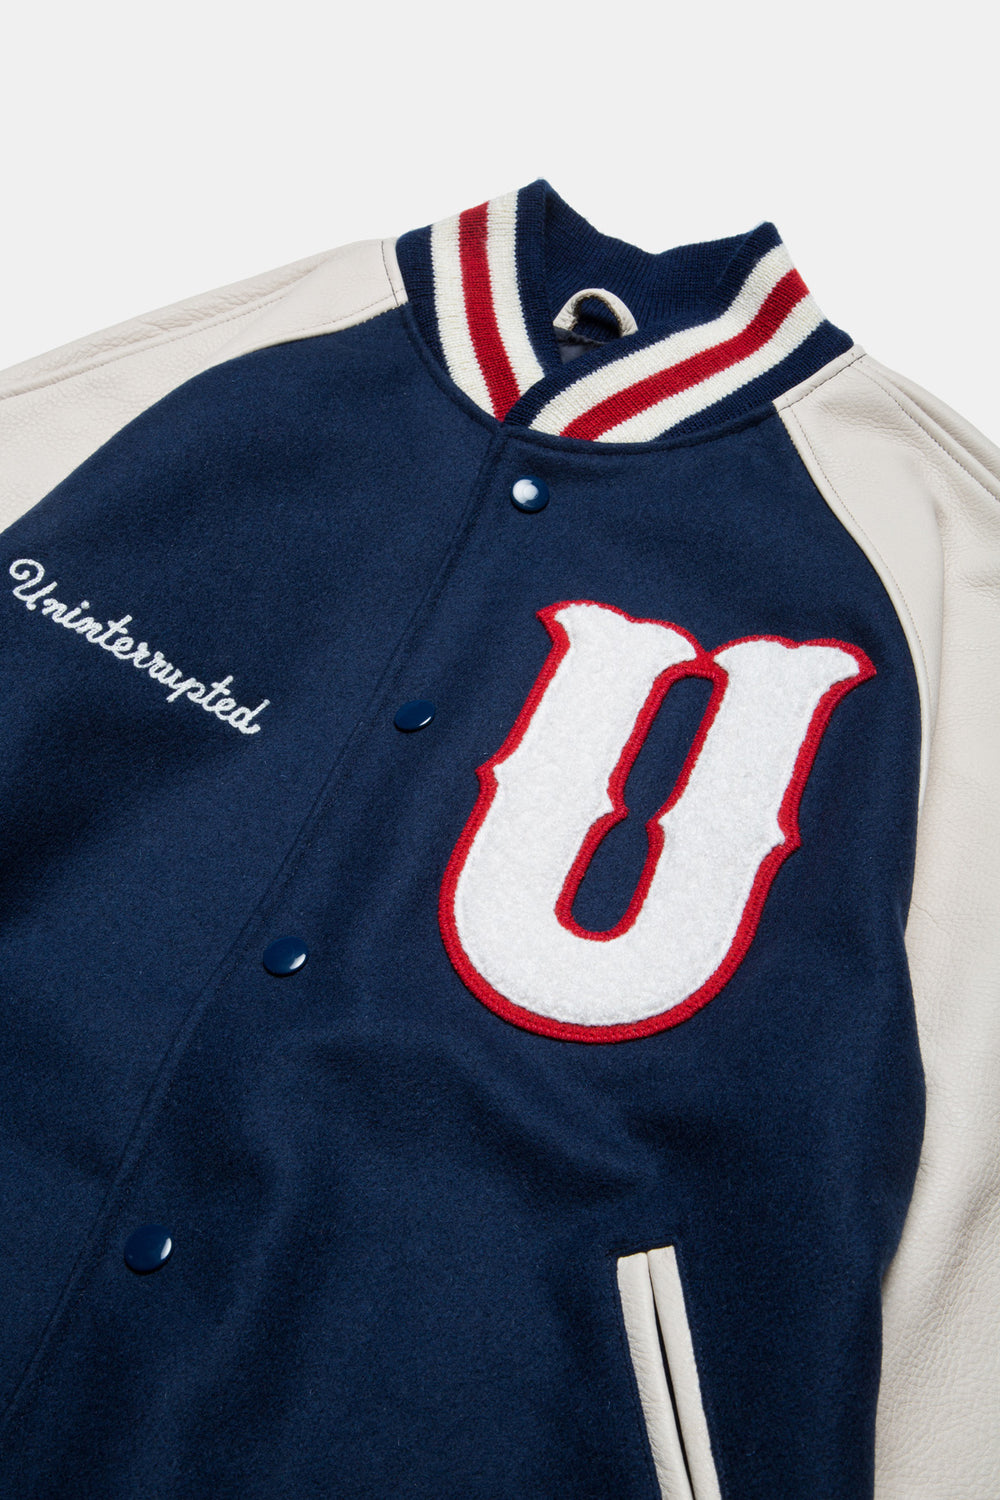 UNINTERRUPTED X GOLDEN BEAR ALL STAR VARSITY JACKET BLUE (4458685235280) - closer up view of the top of the jacket